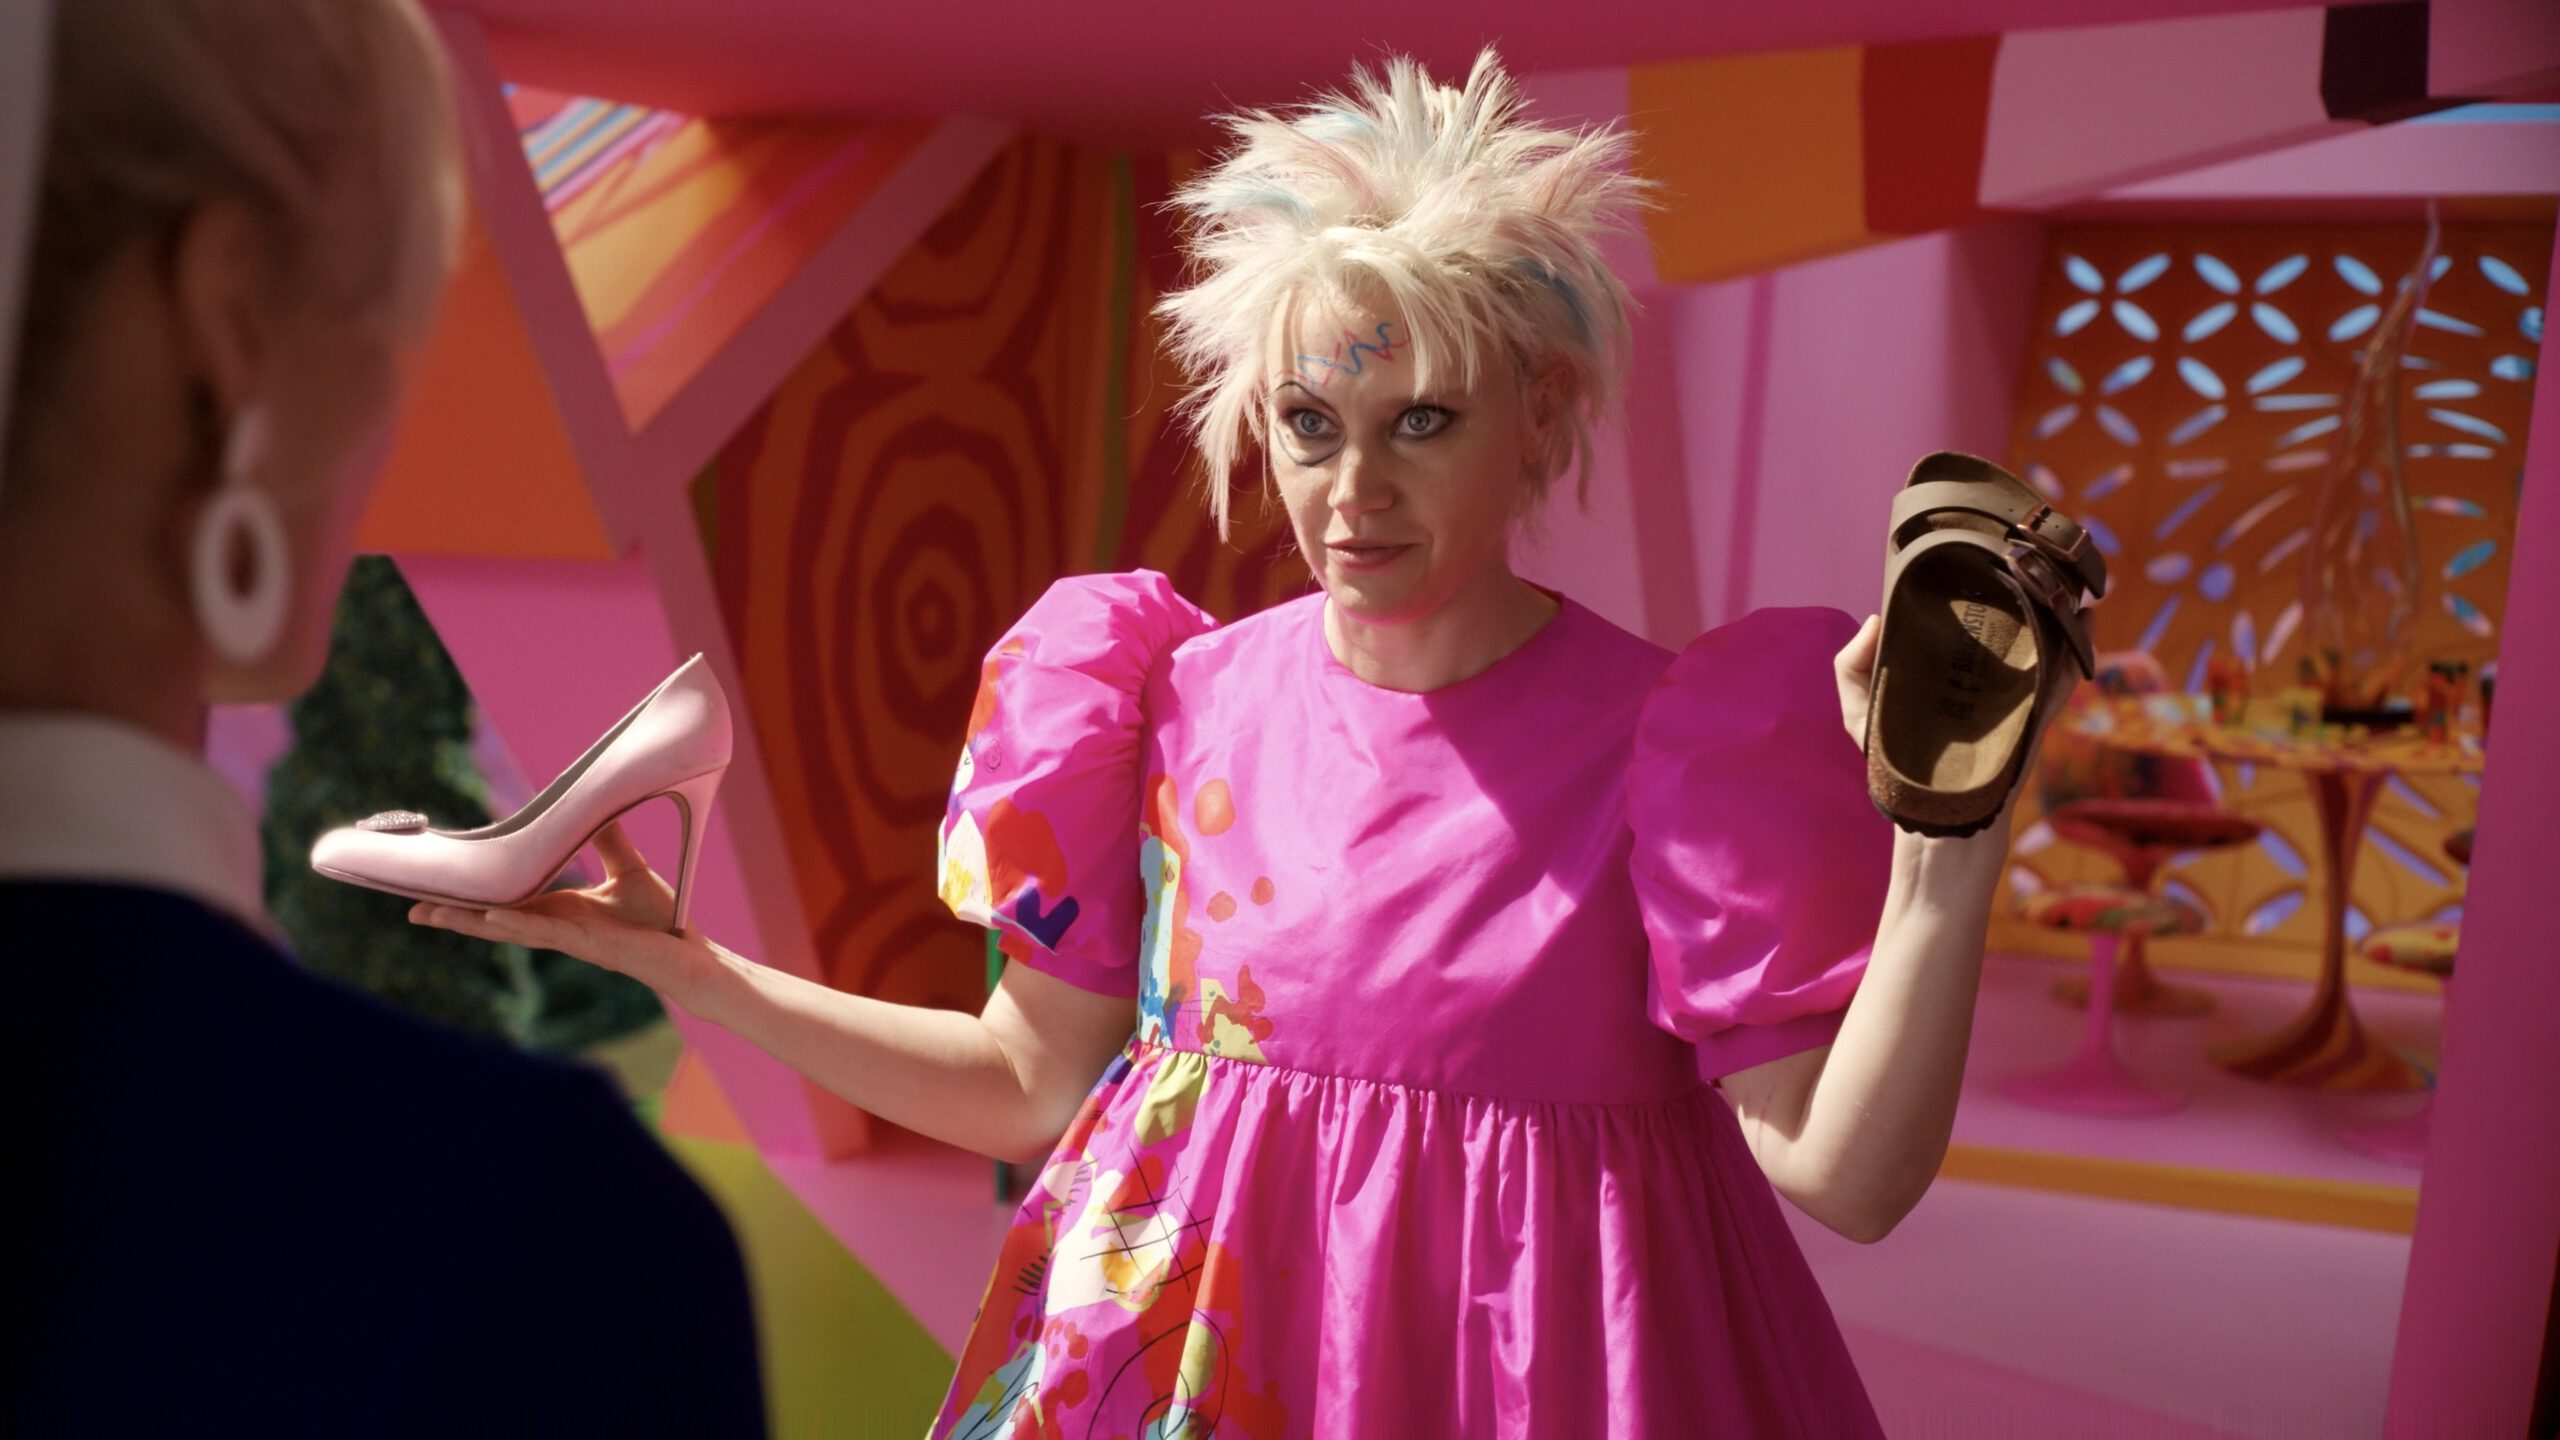 A woman in a pink dress with spiky blonde hair and crayon drawings all over her face holds a high heel in one hand and a Birkenstock sandal in the other.